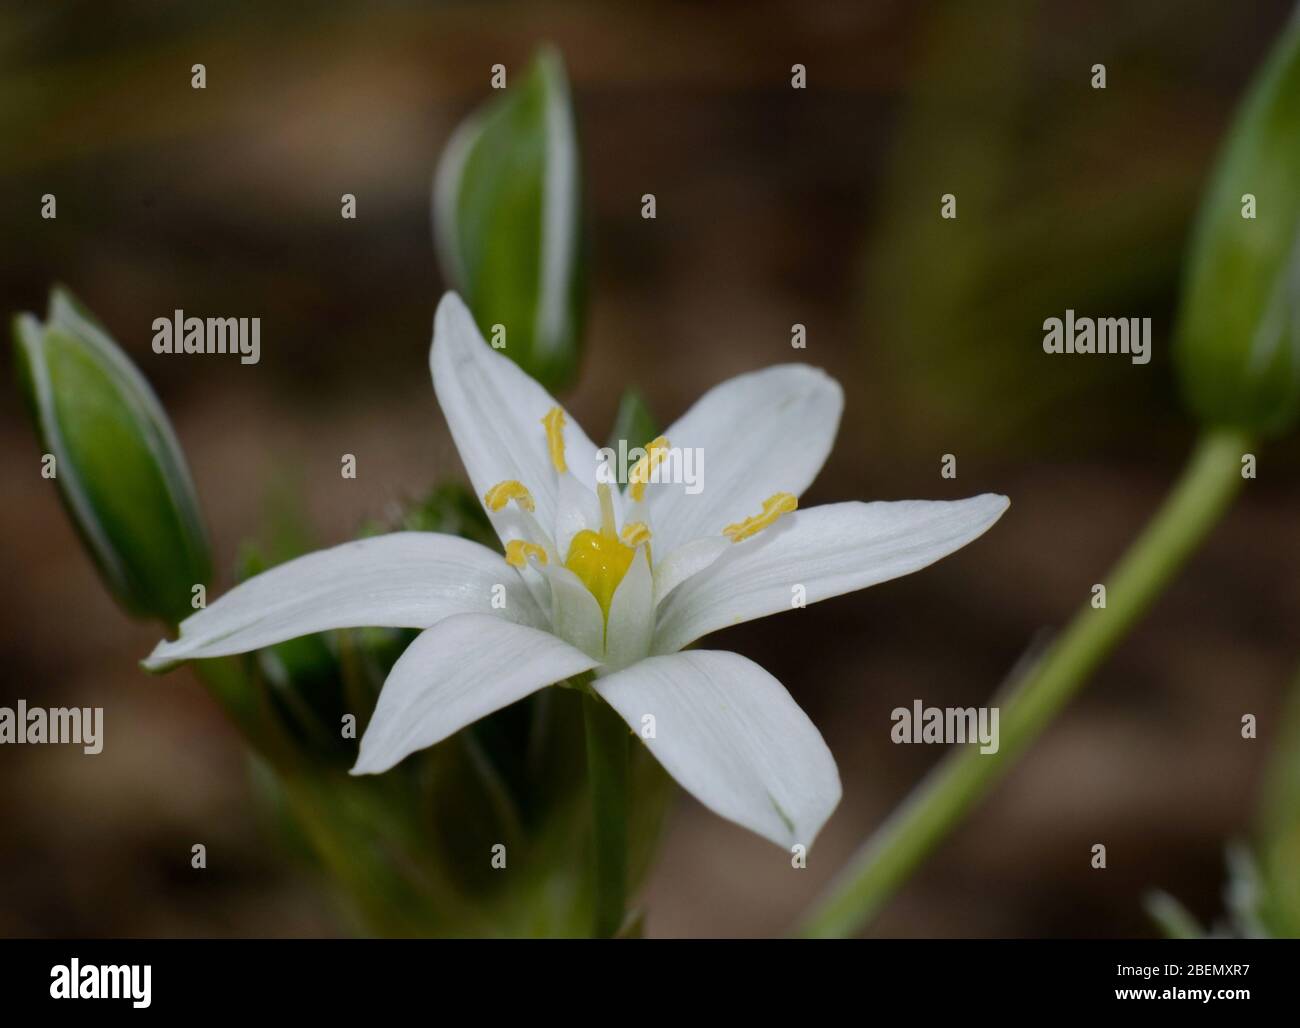 close-up of Star of Bethlehem white wildflower against a blurred background Stock Photo